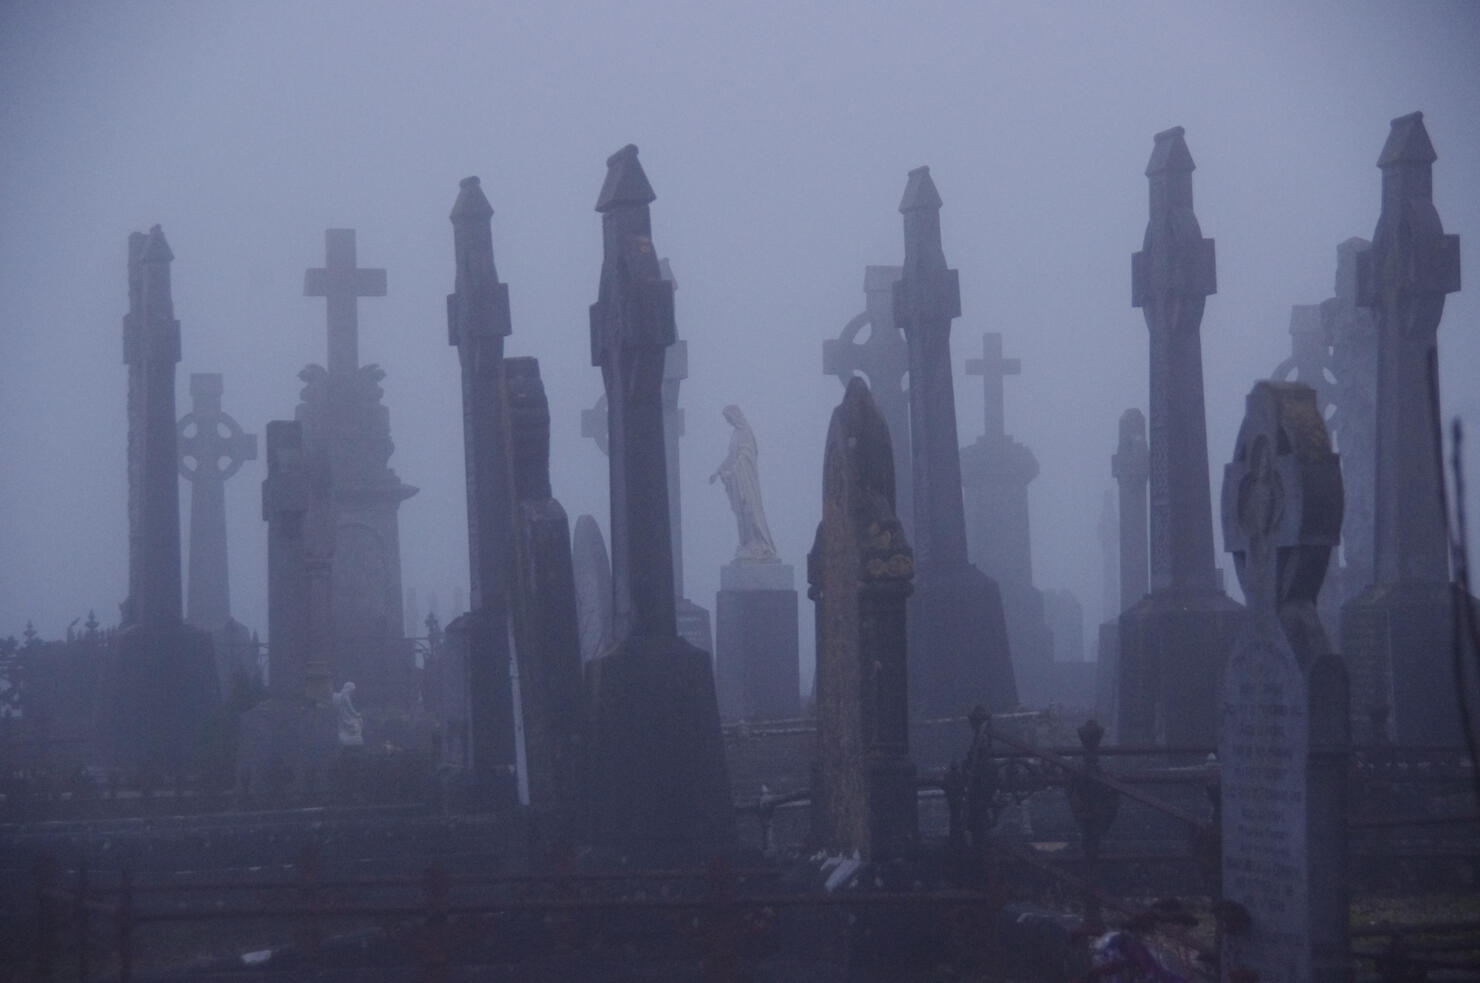 scary graveyard/cemetary in galway